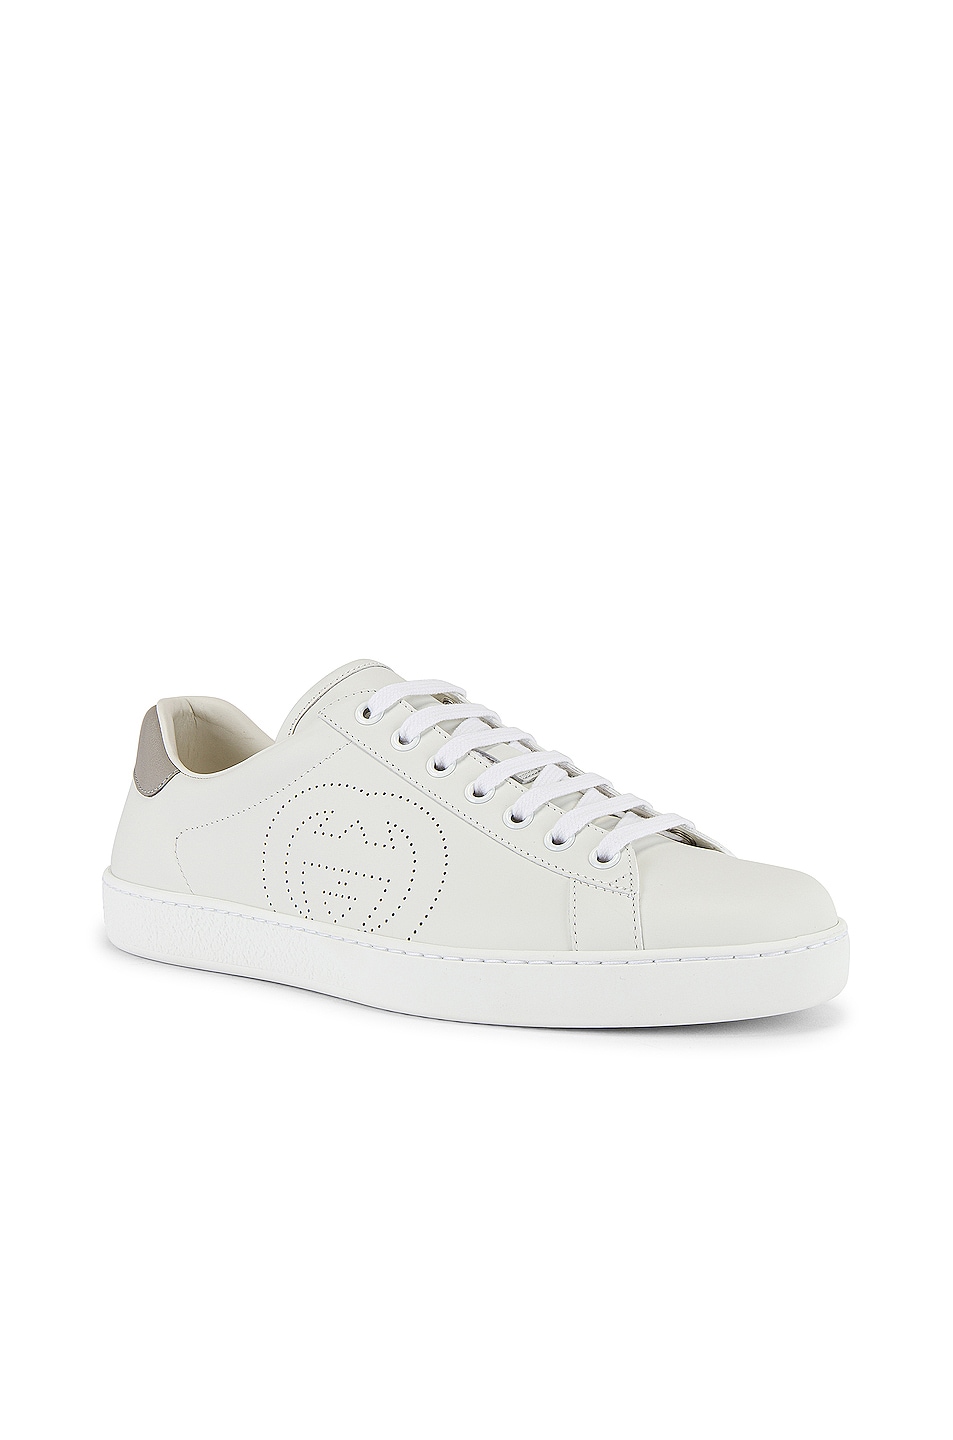 Image 1 of Gucci New Ace Sneaker in White & Grey